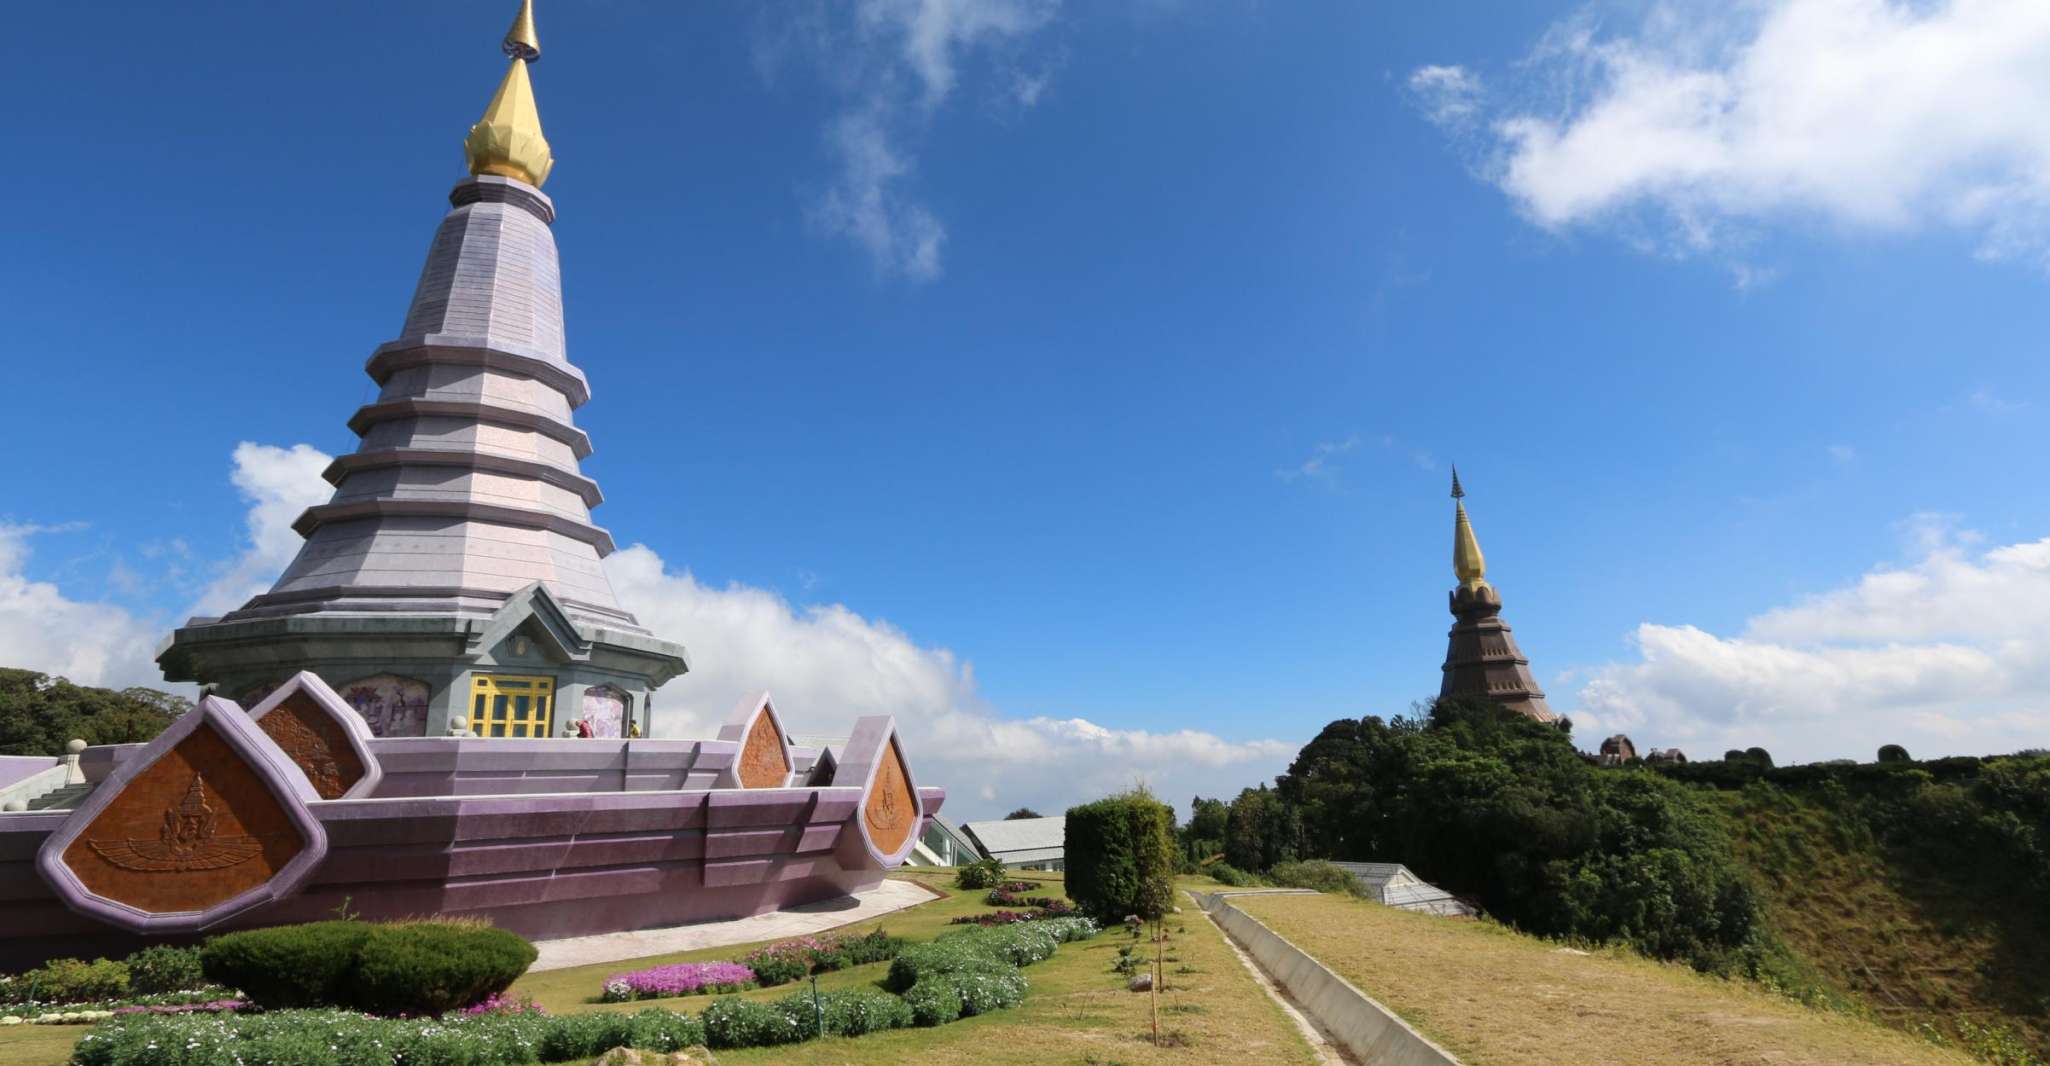 Chiang Mai, Doi Inthanon National Park Visit and Guided Hike - Housity